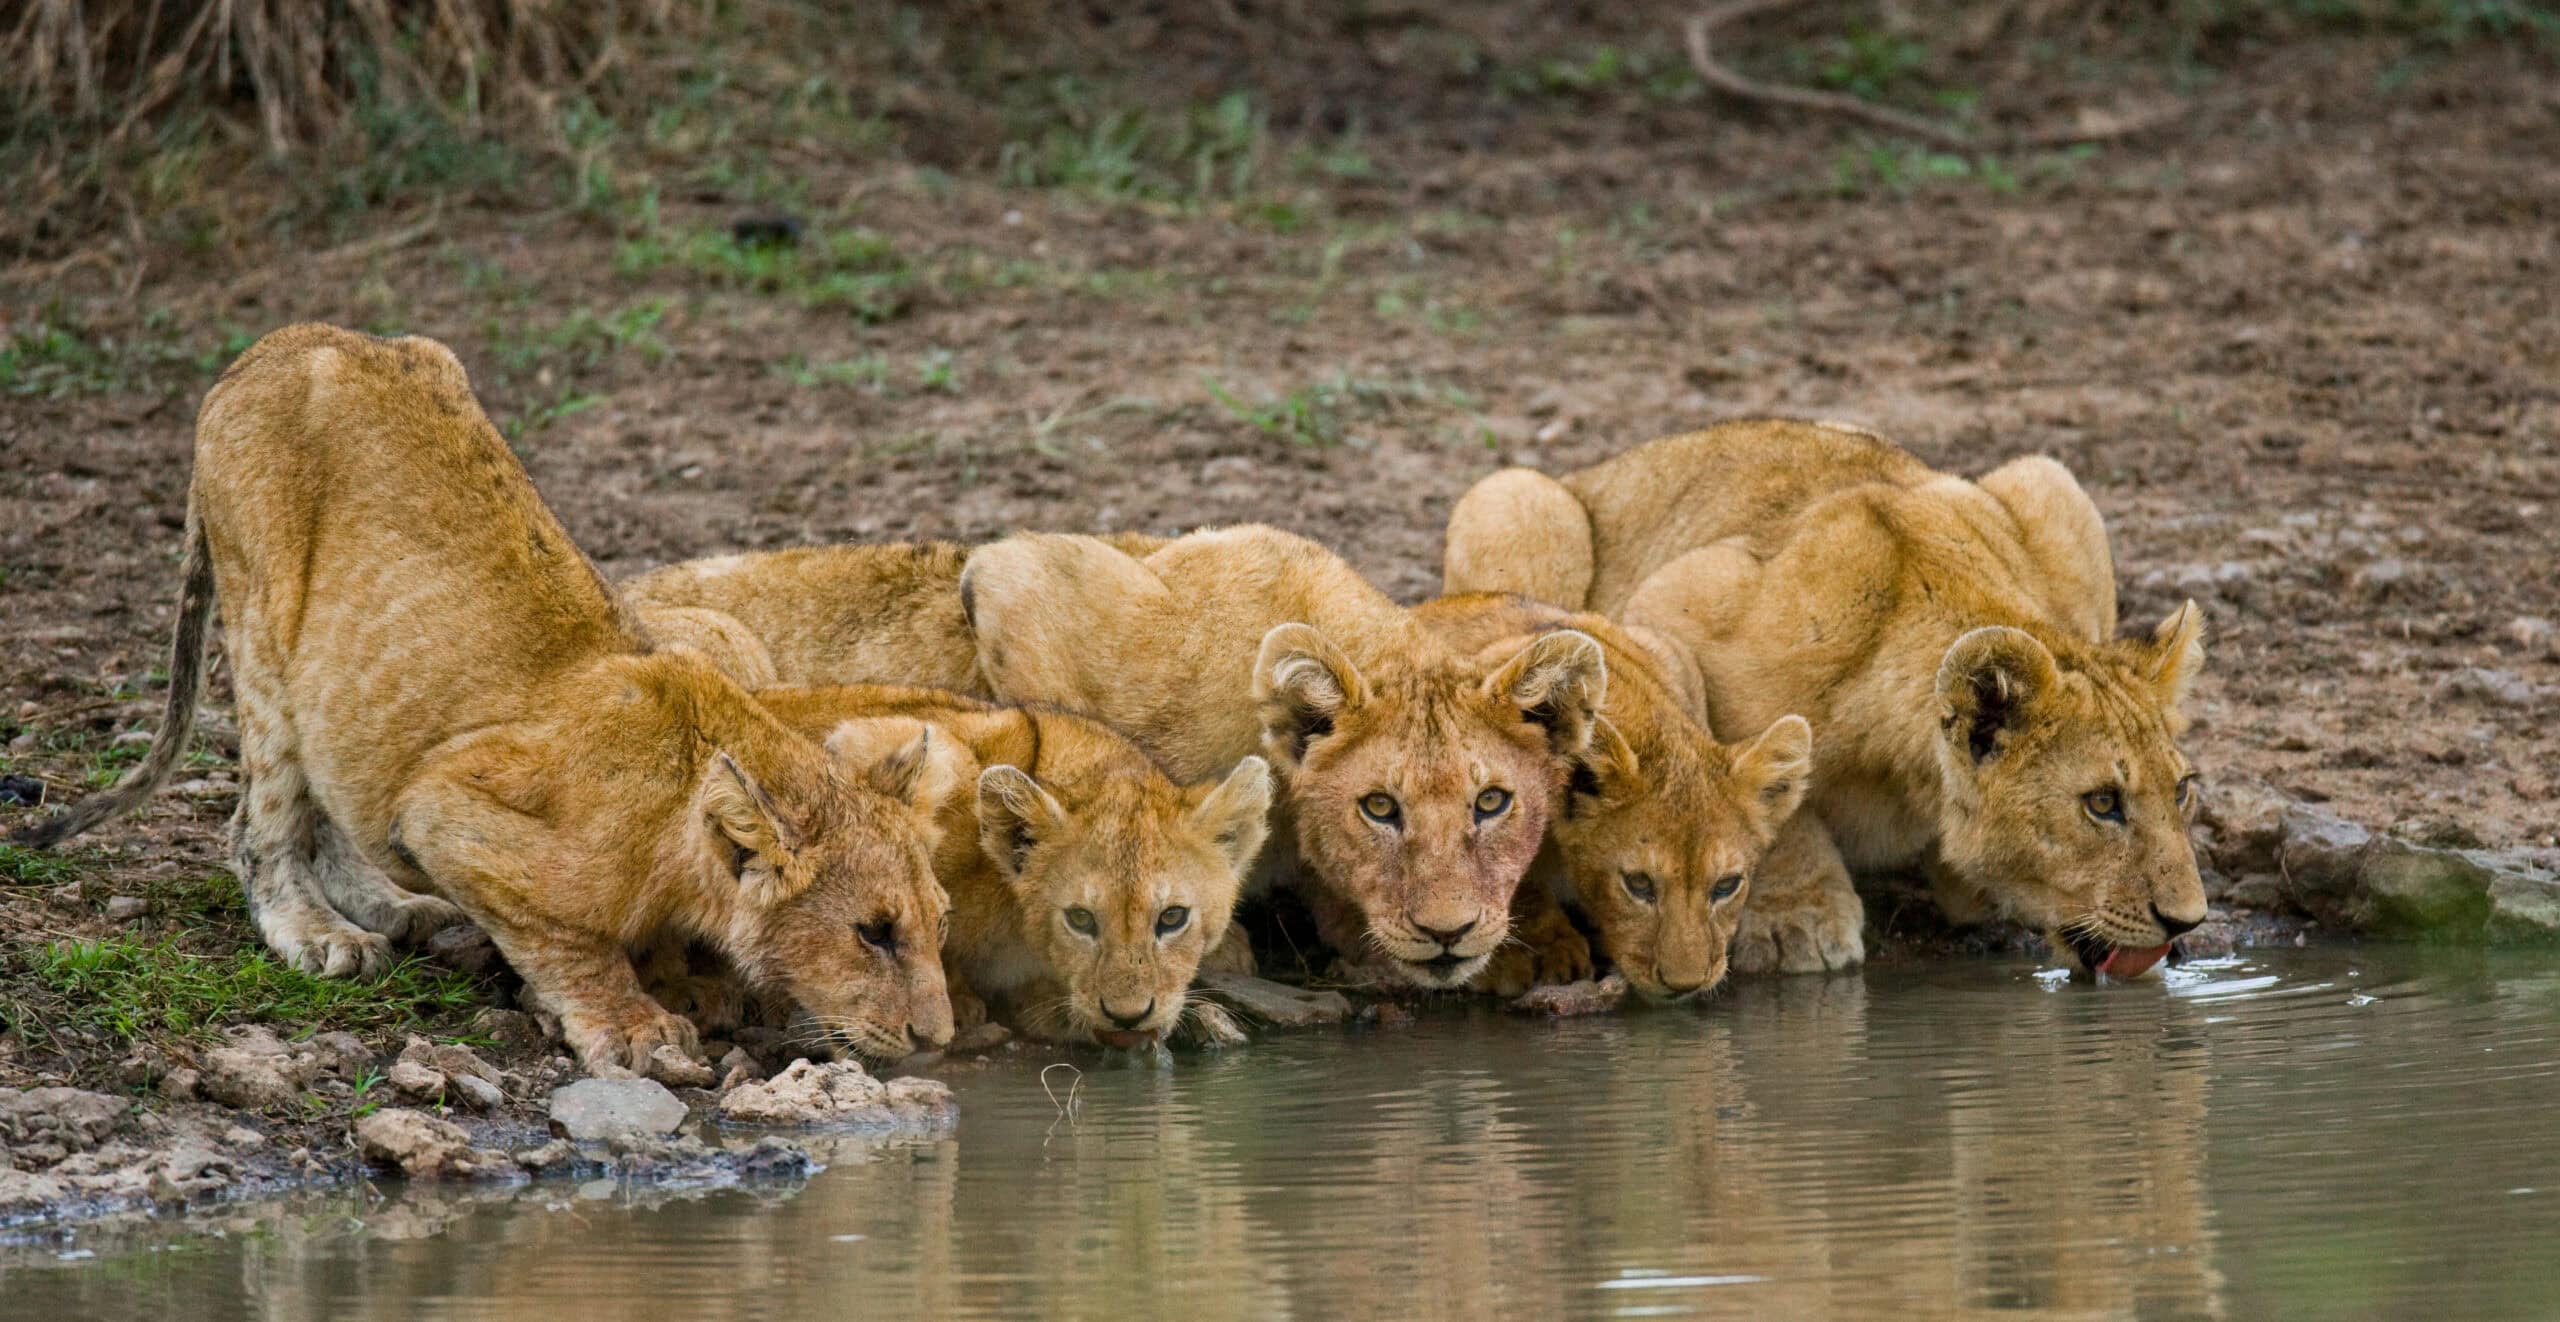 <p>Altogether, they drink, this scene of the show is a tender, melancholic moment, which is probably the viewers as well as characters' desire to empathize with each other.</p> <p>Youngsters of the pride are naturally the most excited and naive cubs start running to join in. They imitate the elders, adopting the various techniques or ways by which one can survive.</p>           Sharks, lions, tigers, as well as all about cats & dogs!           <a href='https://www.msn.com/en-us/channel/source/Animals%20Around%20The%20Globe%20US/sr-vid-ryujycftmyx7d7tmb5trkya28raxe6r56iuty5739ky2rf5d5wws?ocid=anaheim-ntp-following&cvid=1ff21e393be1475a8b3dd9a83a86b8df&ei=10'>           Click here to get to the Animals Around The Globe profile page</a><b> and hit "Follow" to never miss out.</b>